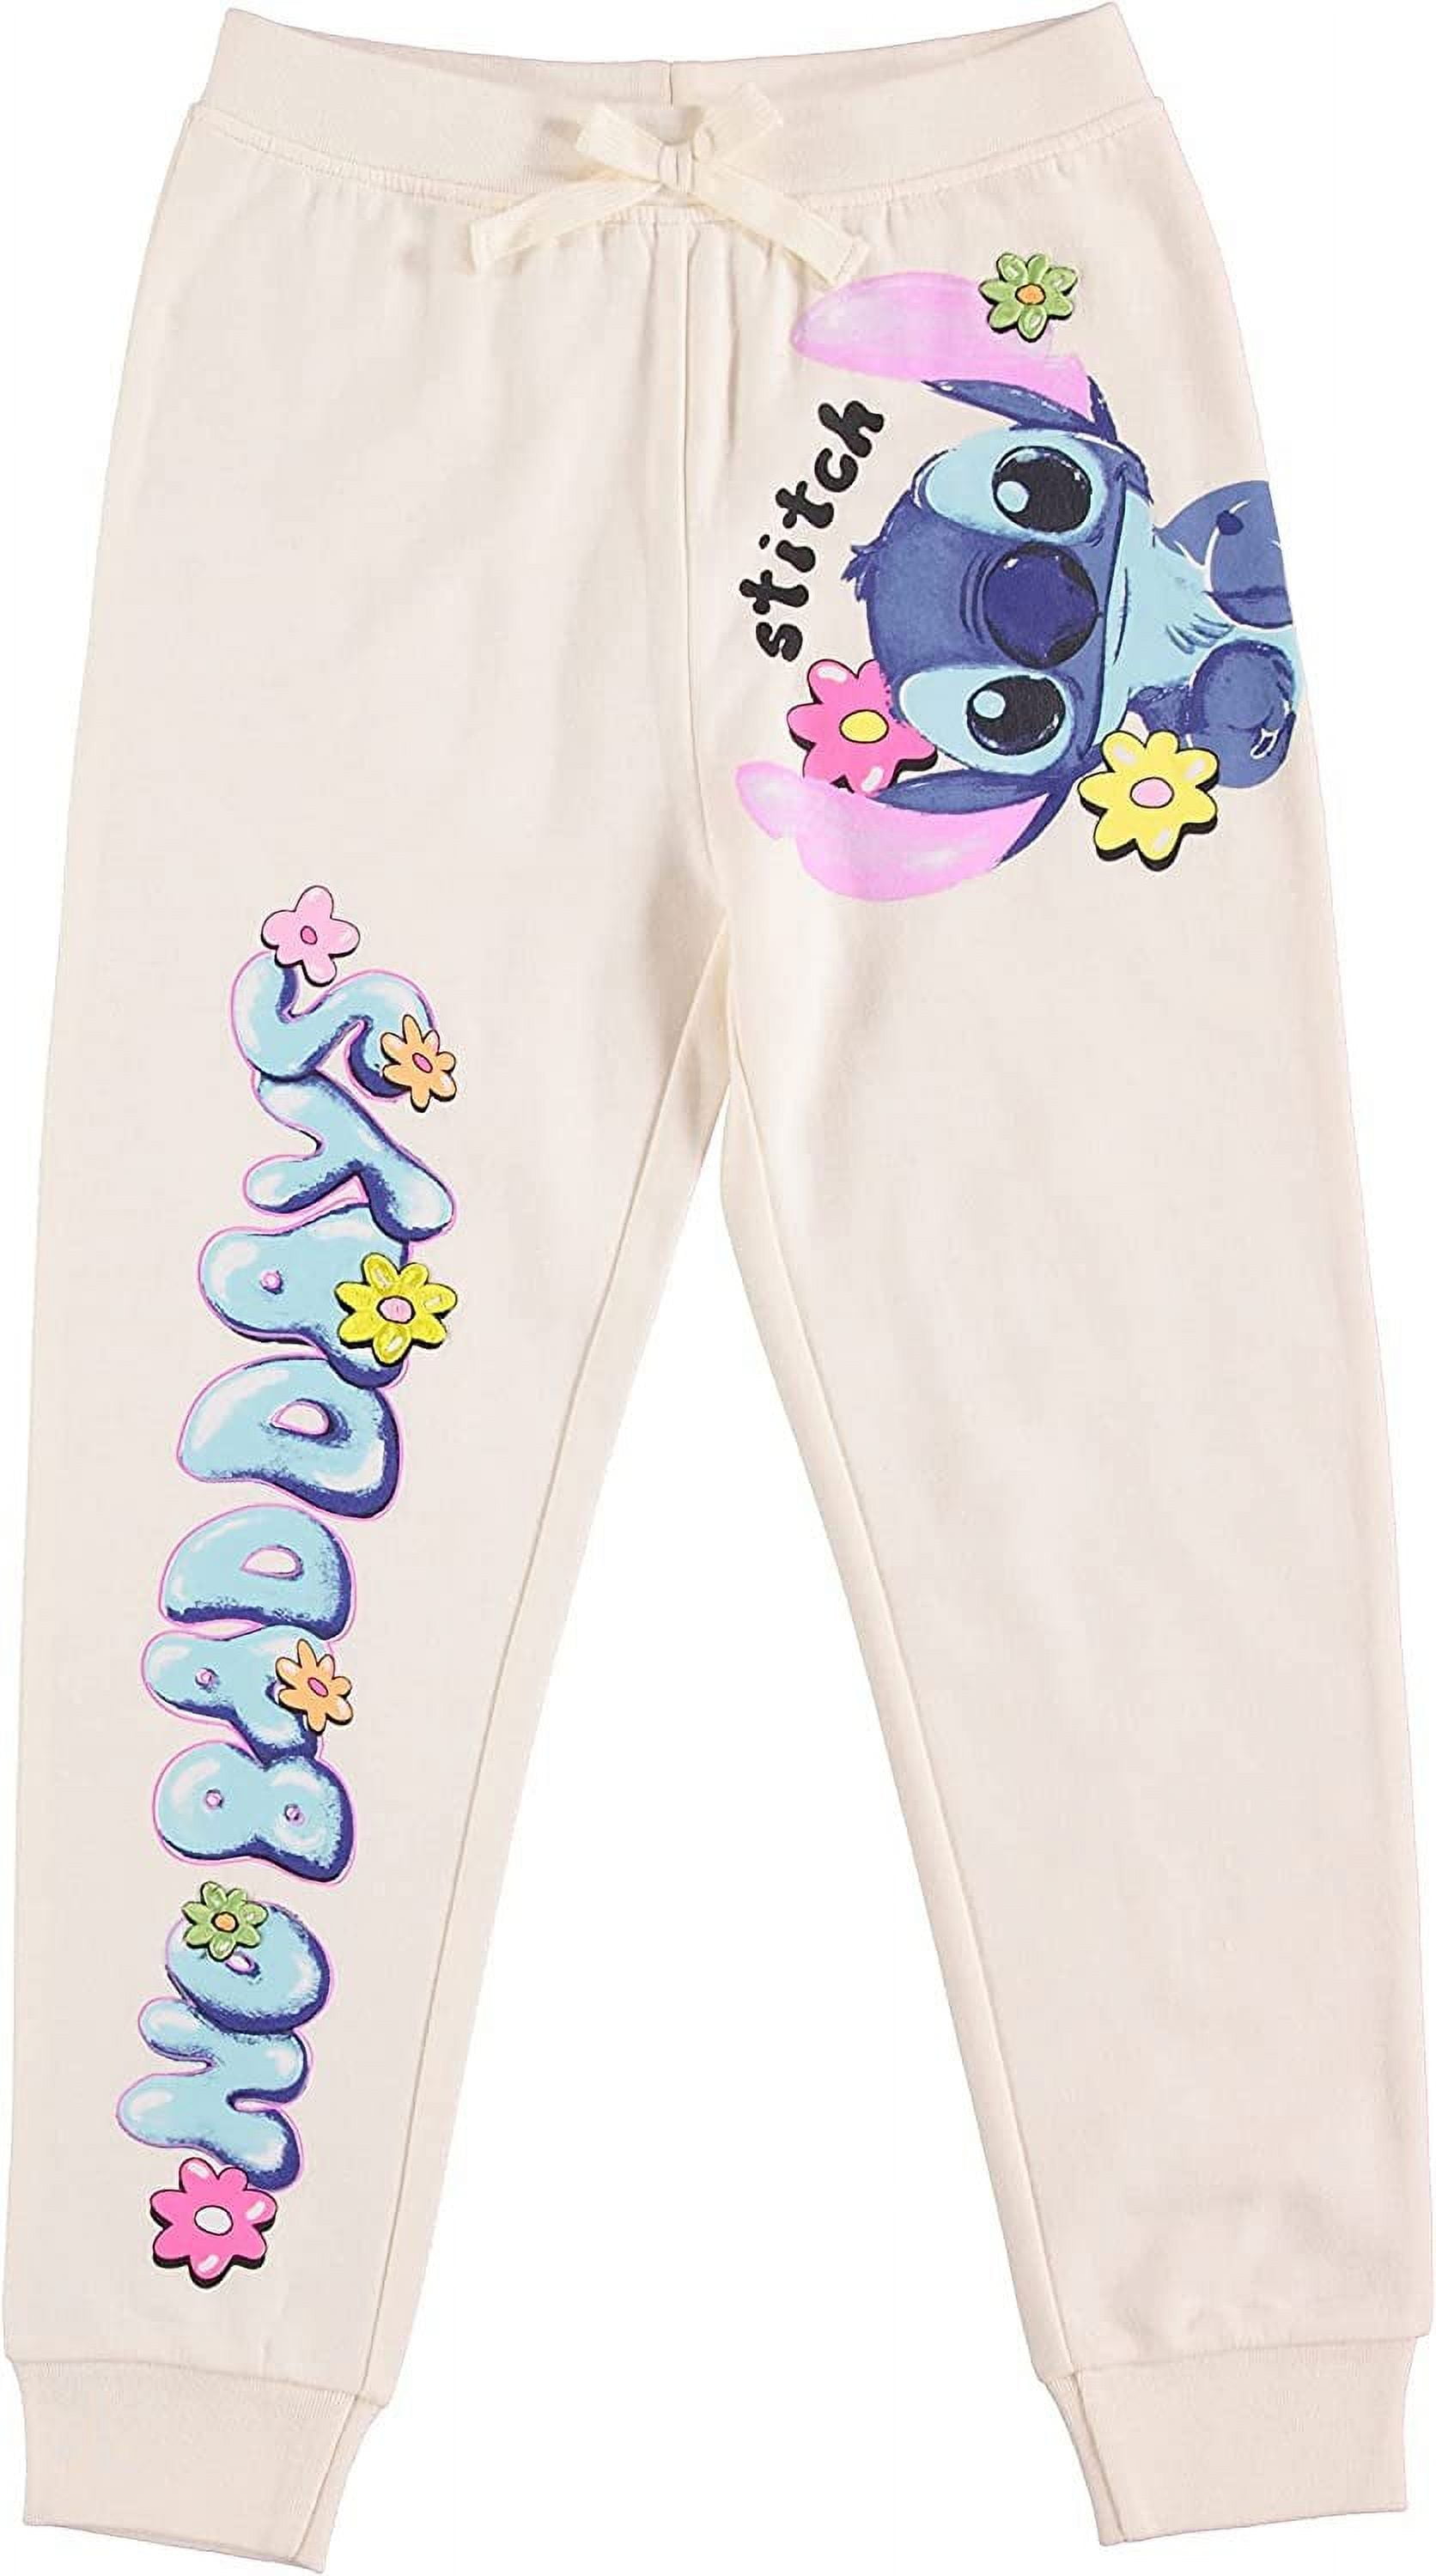 Disney Girls Lilo and Stitch Jogger Sweatpants with Minnie Mouse